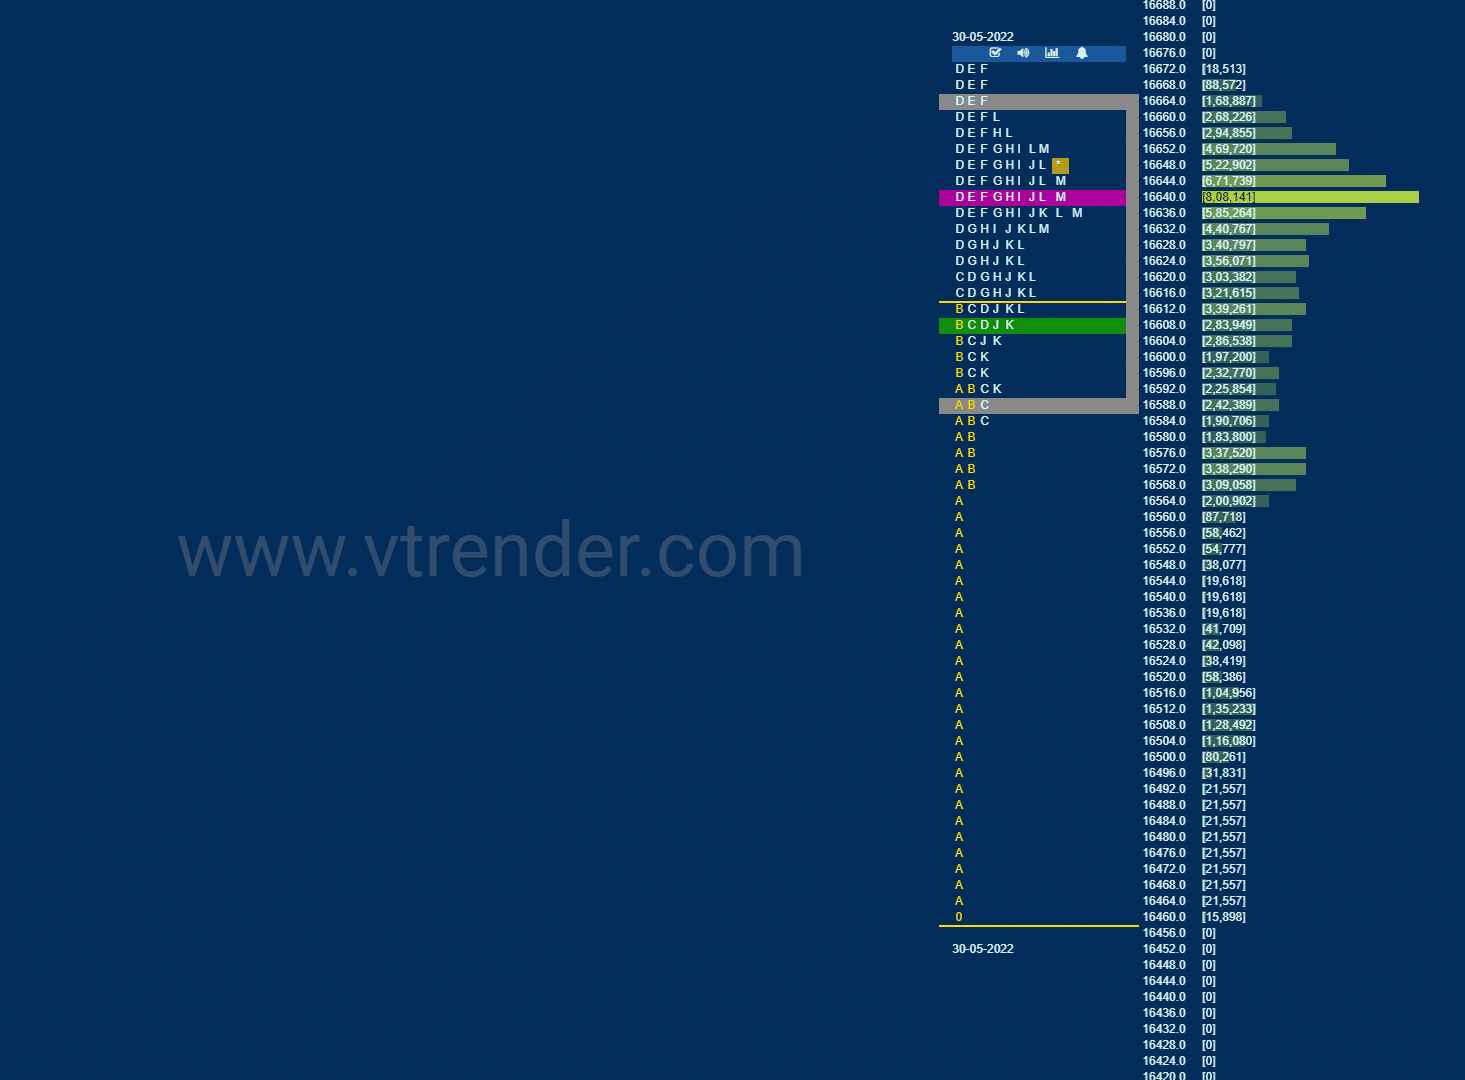 Nf 20 Market Profile Analysis Dated 30Th May 2022 Banknifty Futures, Charts, Day Trading, Intraday Trading, Intraday Trading Strategies, Market Profile, Market Profile Trading Strategies, Nifty Futures, Order Flow Analysis, Support And Resistance, Technical Analysis, Trading Strategies, Volume Profile Trading